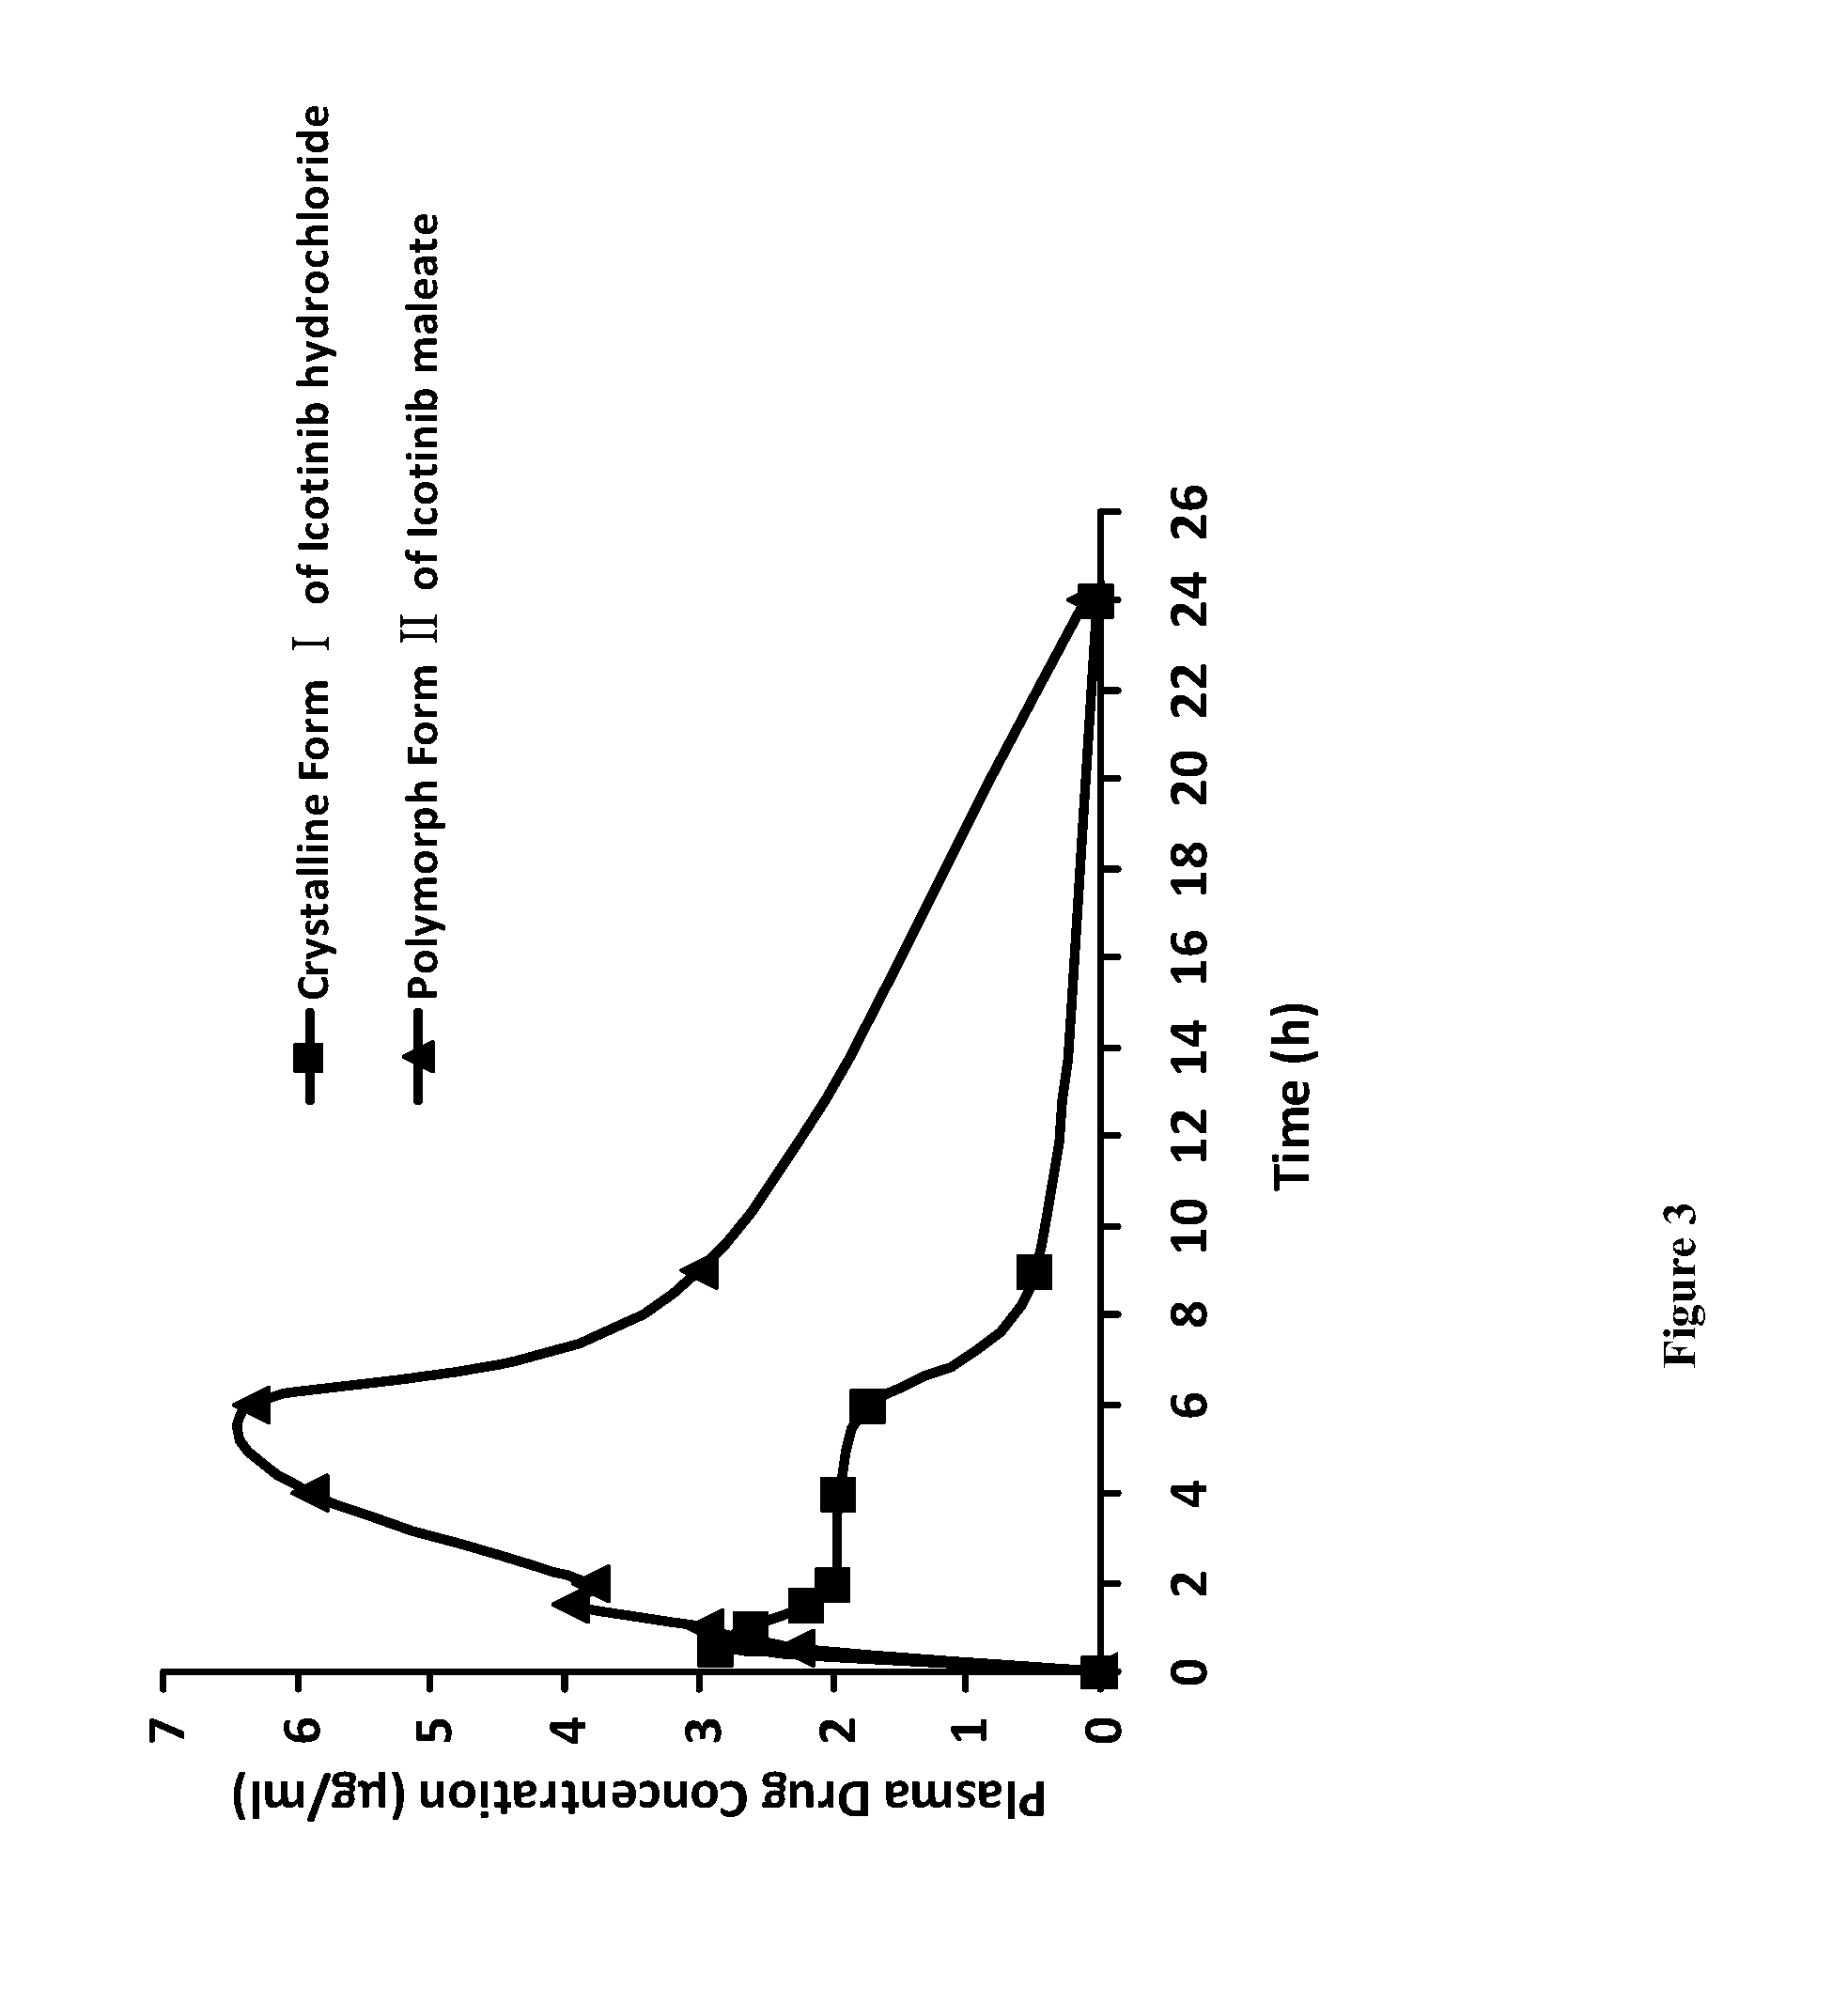 Polymorphic forms of icotinib maleate and uses thereof